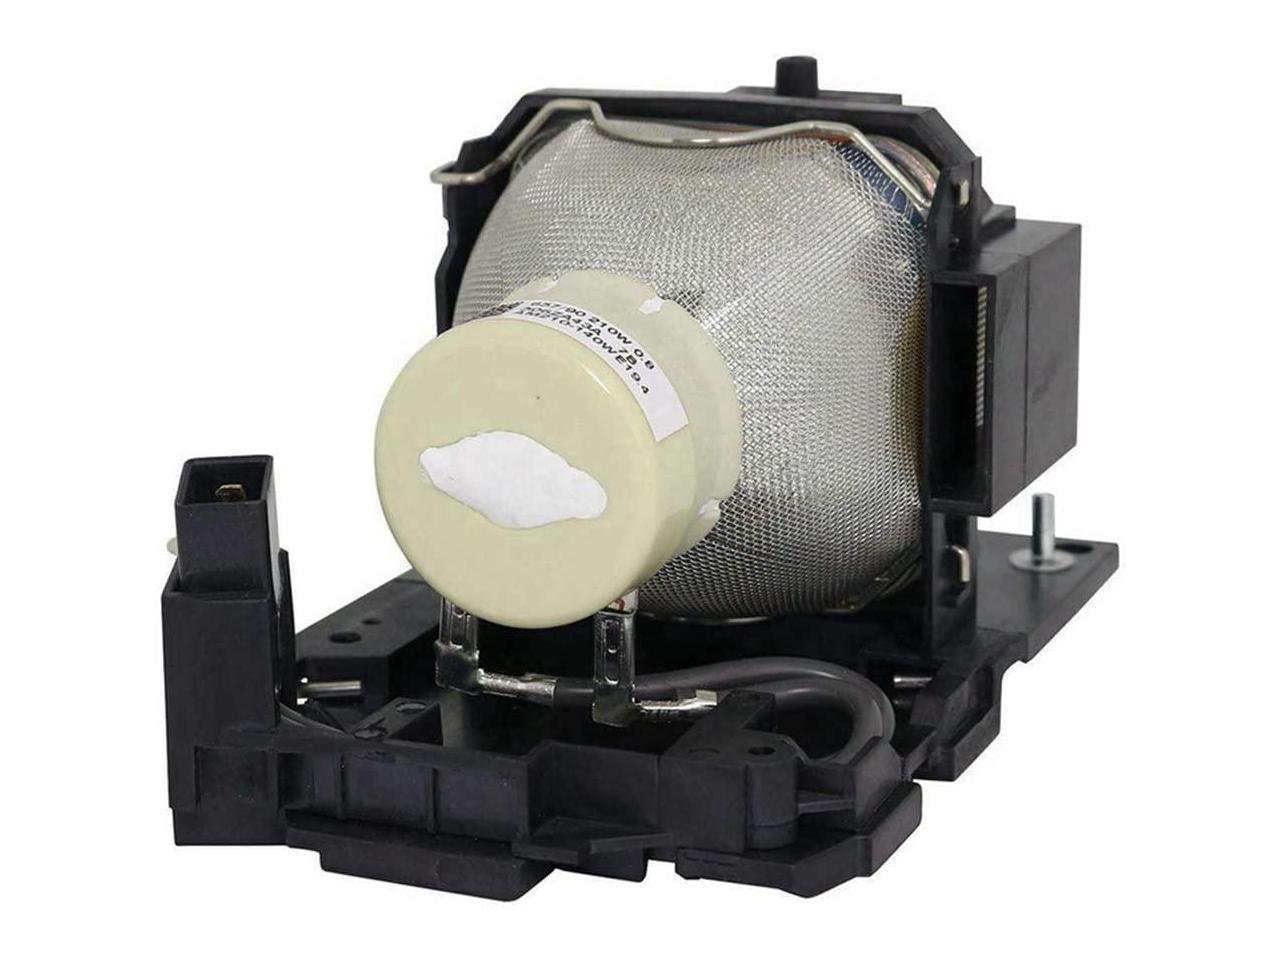 DT01181 DT01251 DT01381 Replacement Projector Lamp for Hitachi CP 